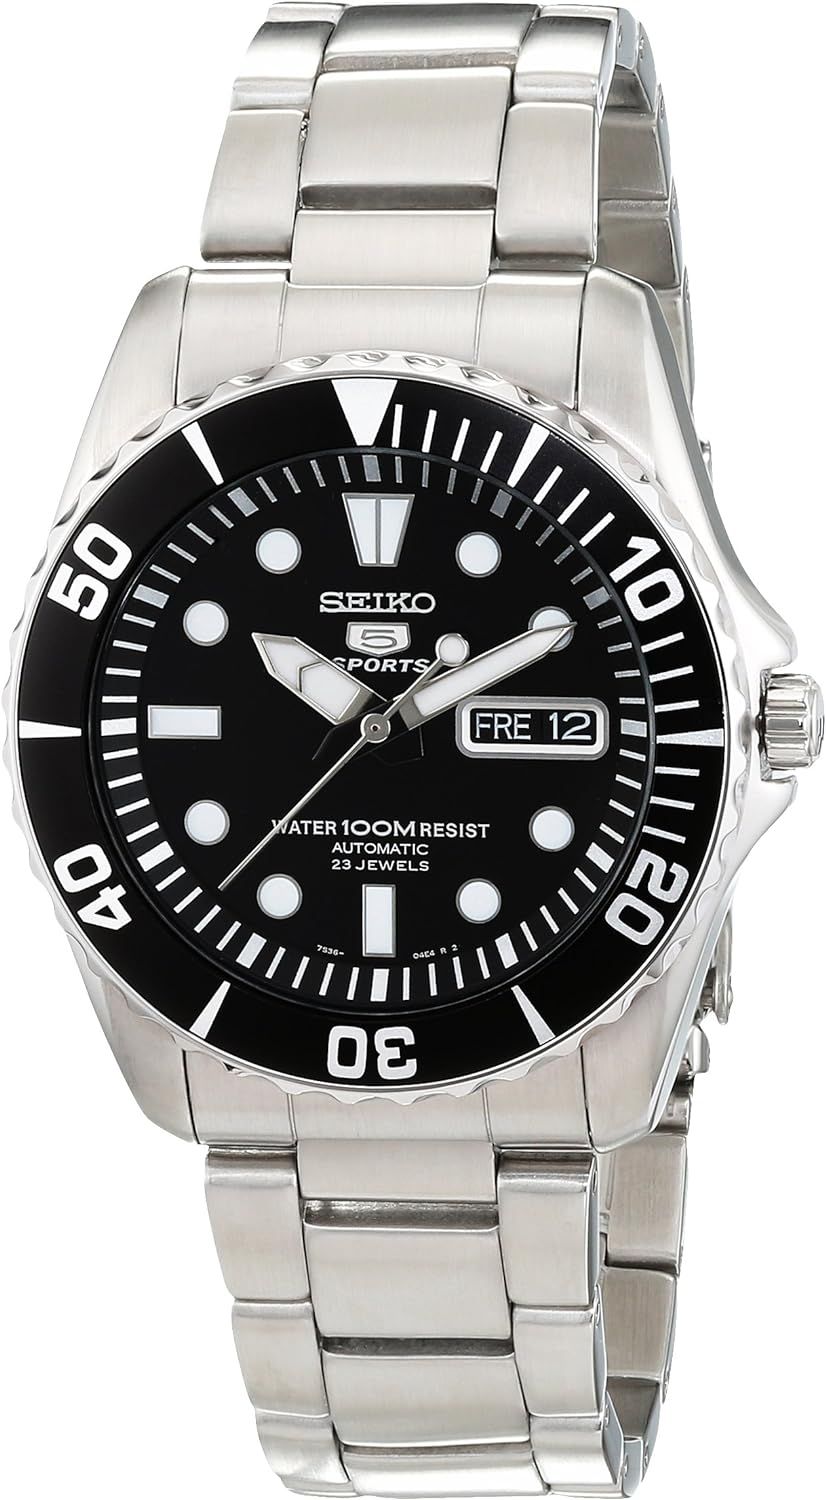 Seiko 5 Automatic Black Dial Stainless Steel Men's Watch SNZF17 | Amazon (US)